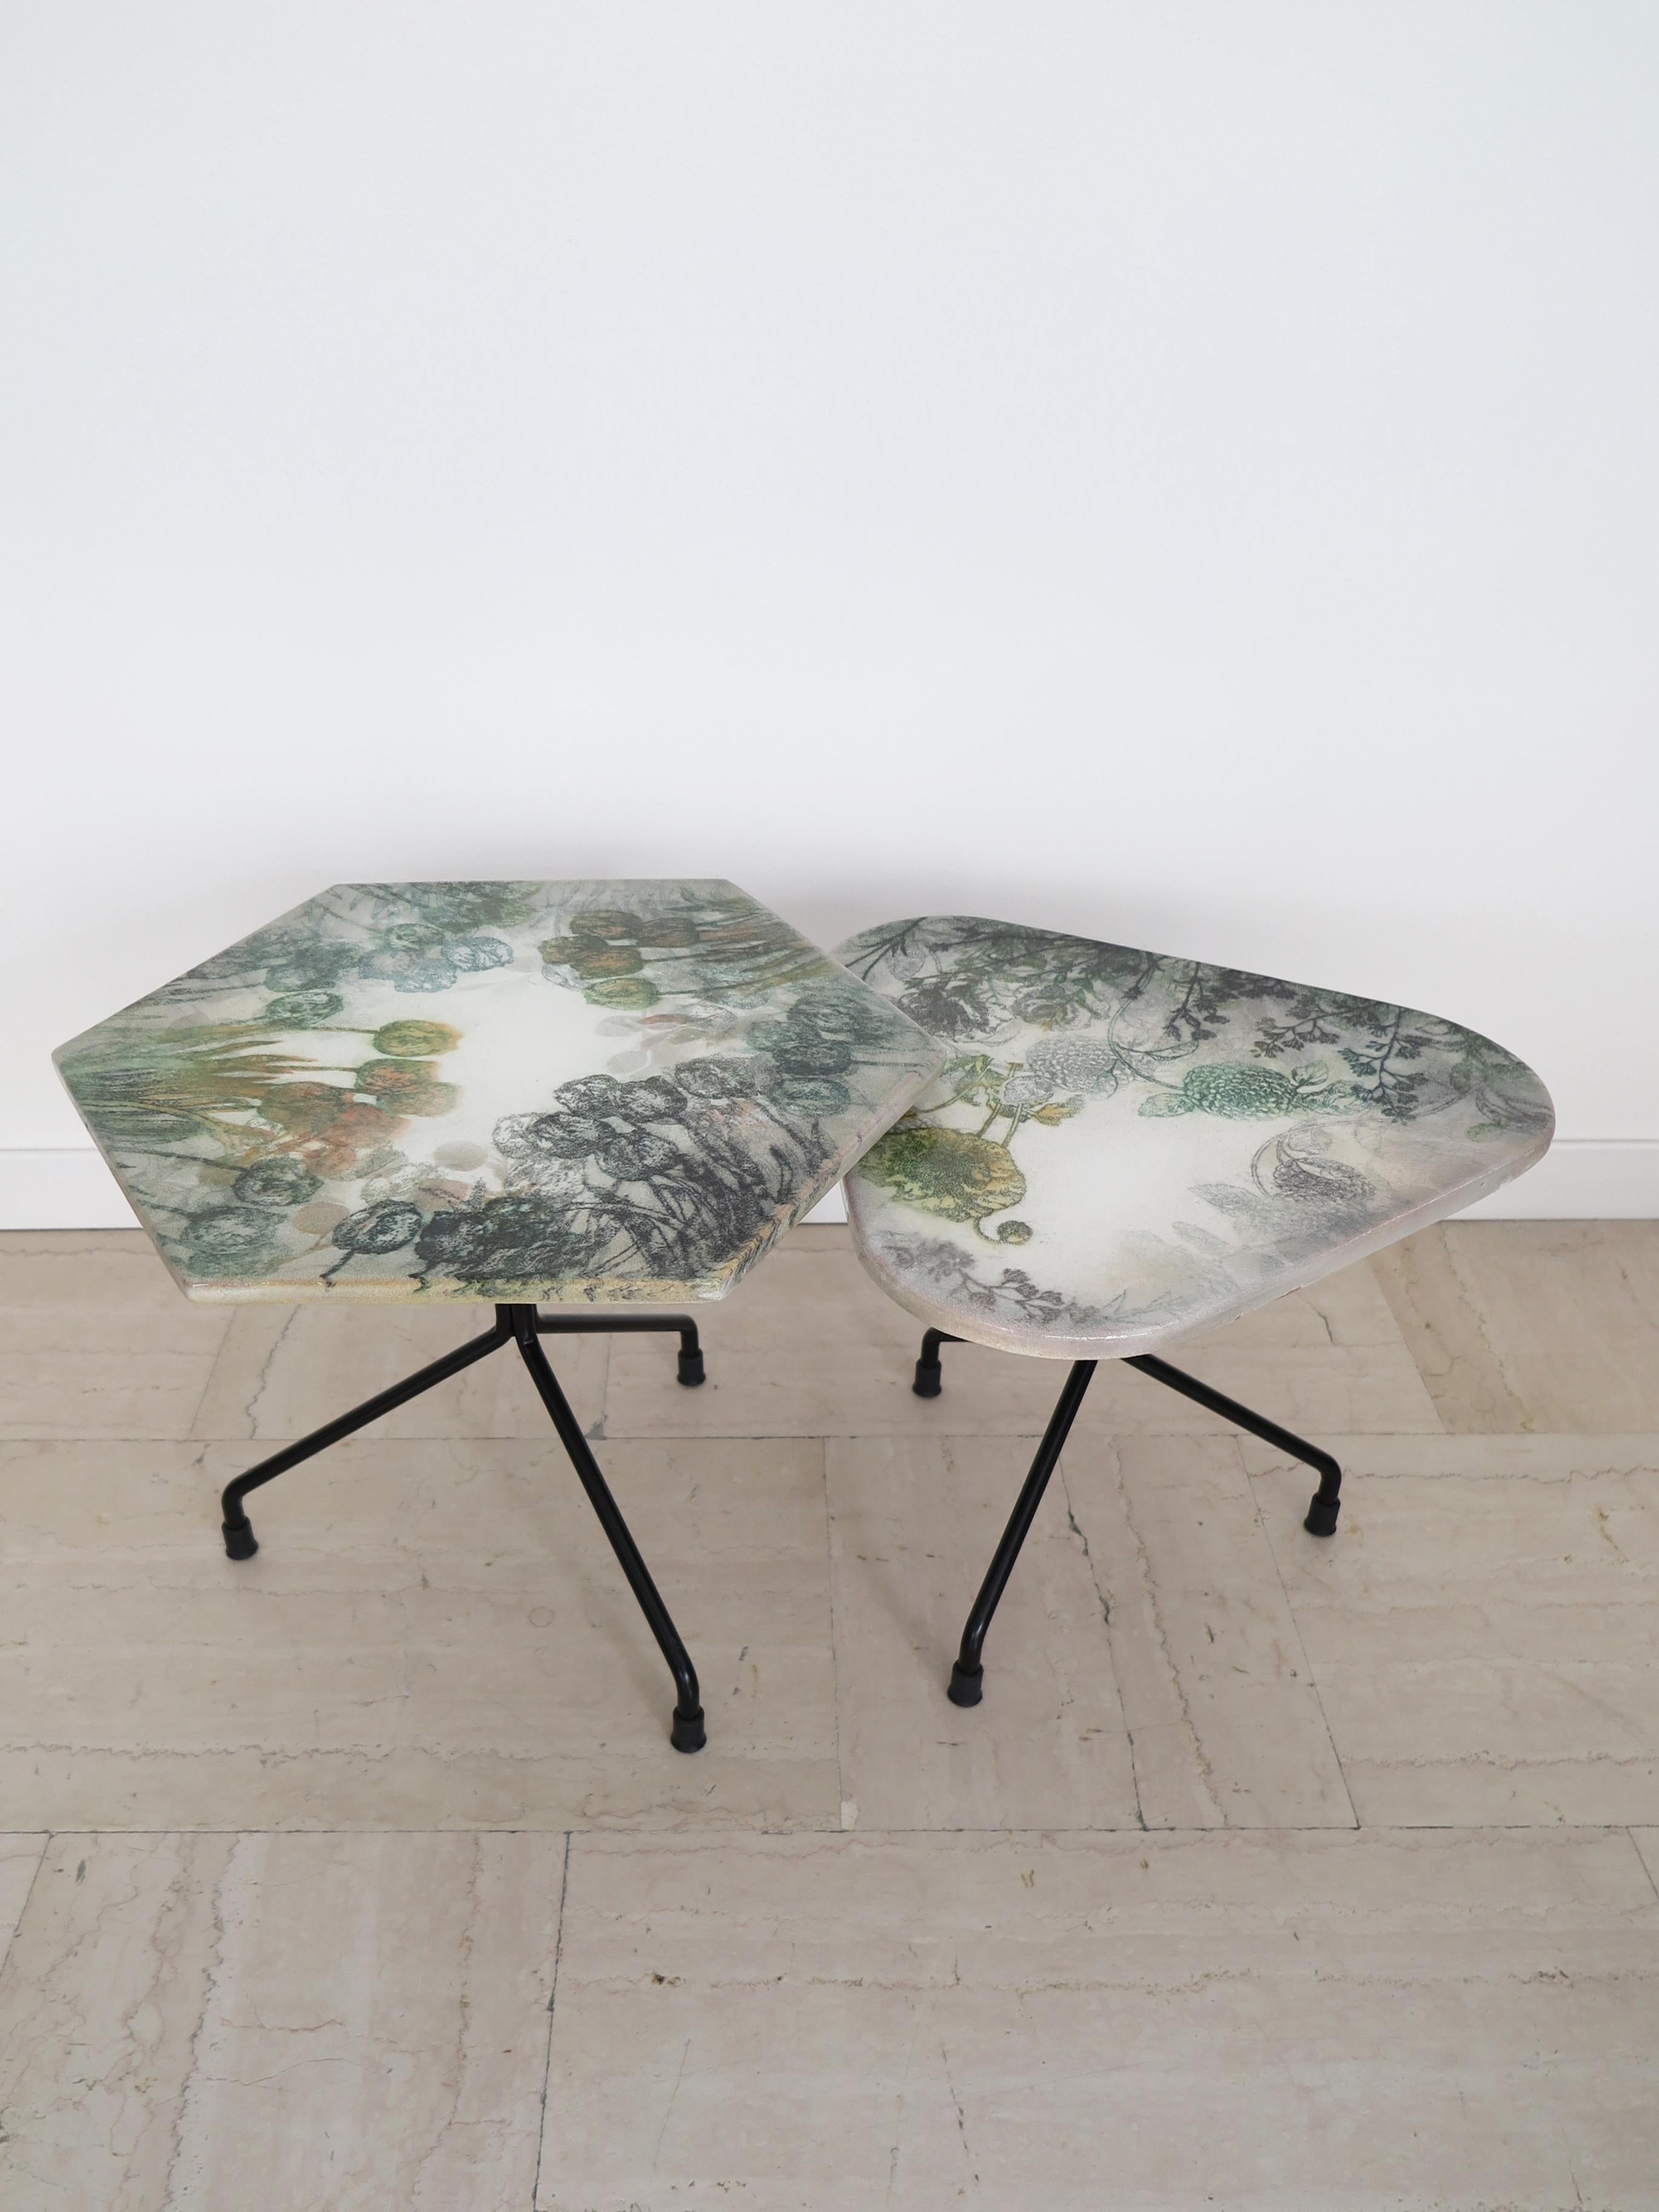 Pair of contemporary Italian coffee tables suitable for both indoor and outdoor use,
with hexagonal and triangular ceramic top hand-decorated with spray-painted floral designs; matt black painted metal foot frame.
New Capperidicasa design for